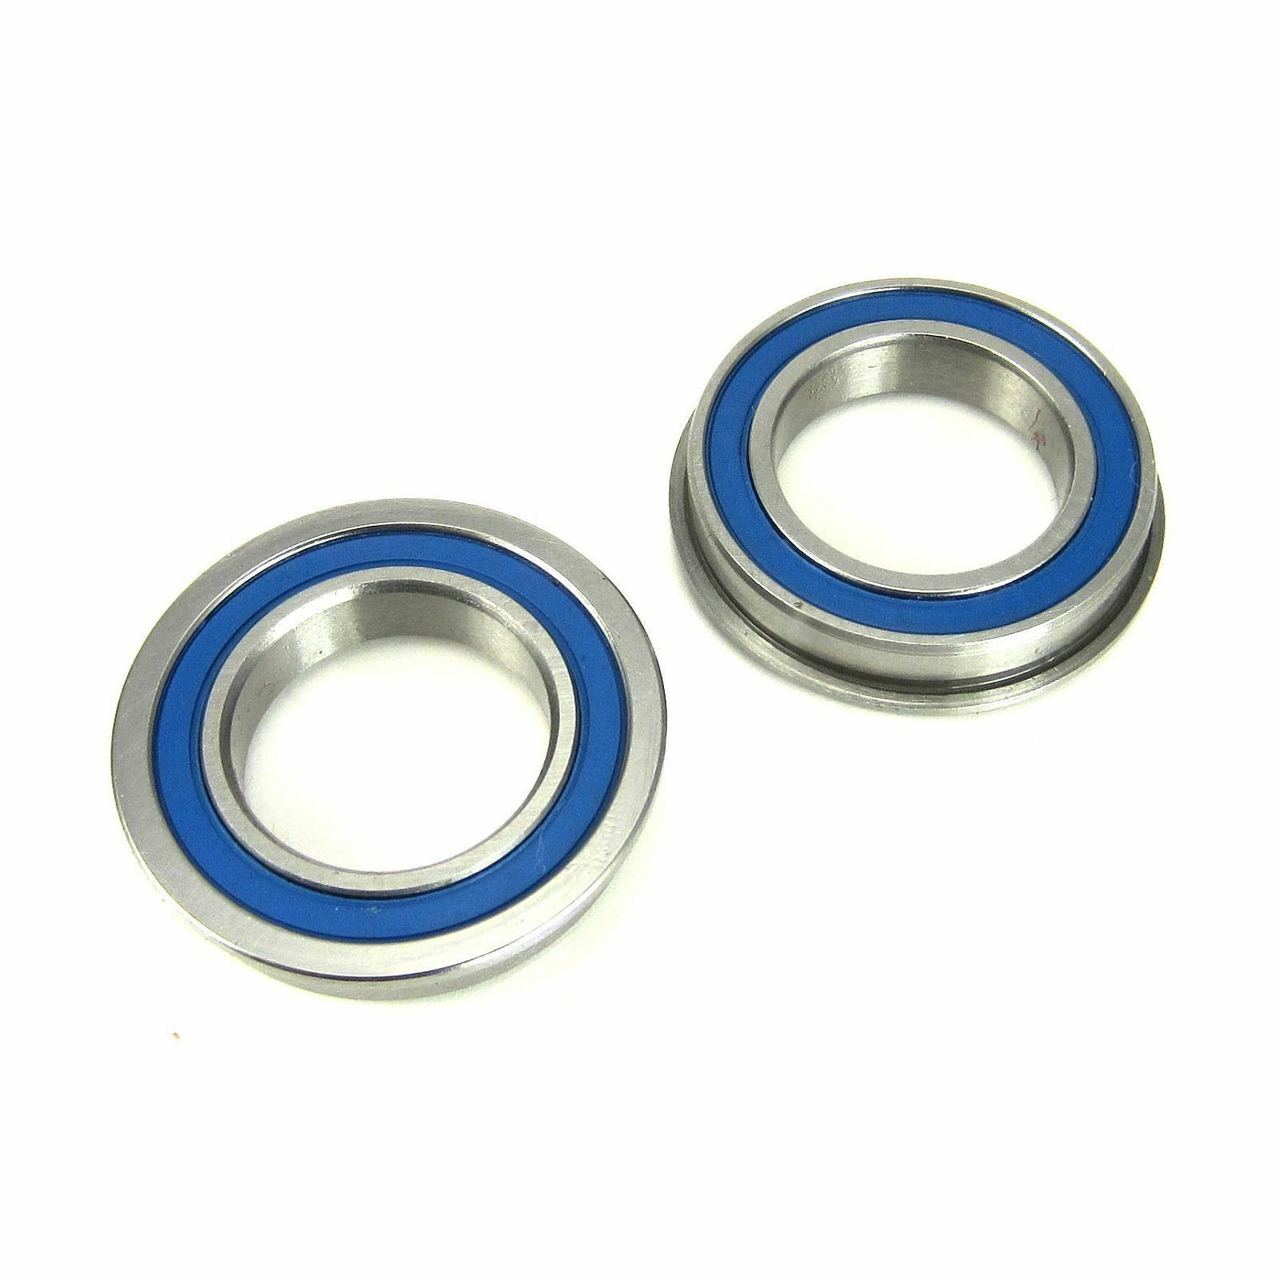 F6802-2RS 15x24x5mm Flanged Precision High Speed RC Ball Bearing, Chrome Steel (GCr15) with Blue Rubber Seals ABEC1 ABEC3 ABEC5